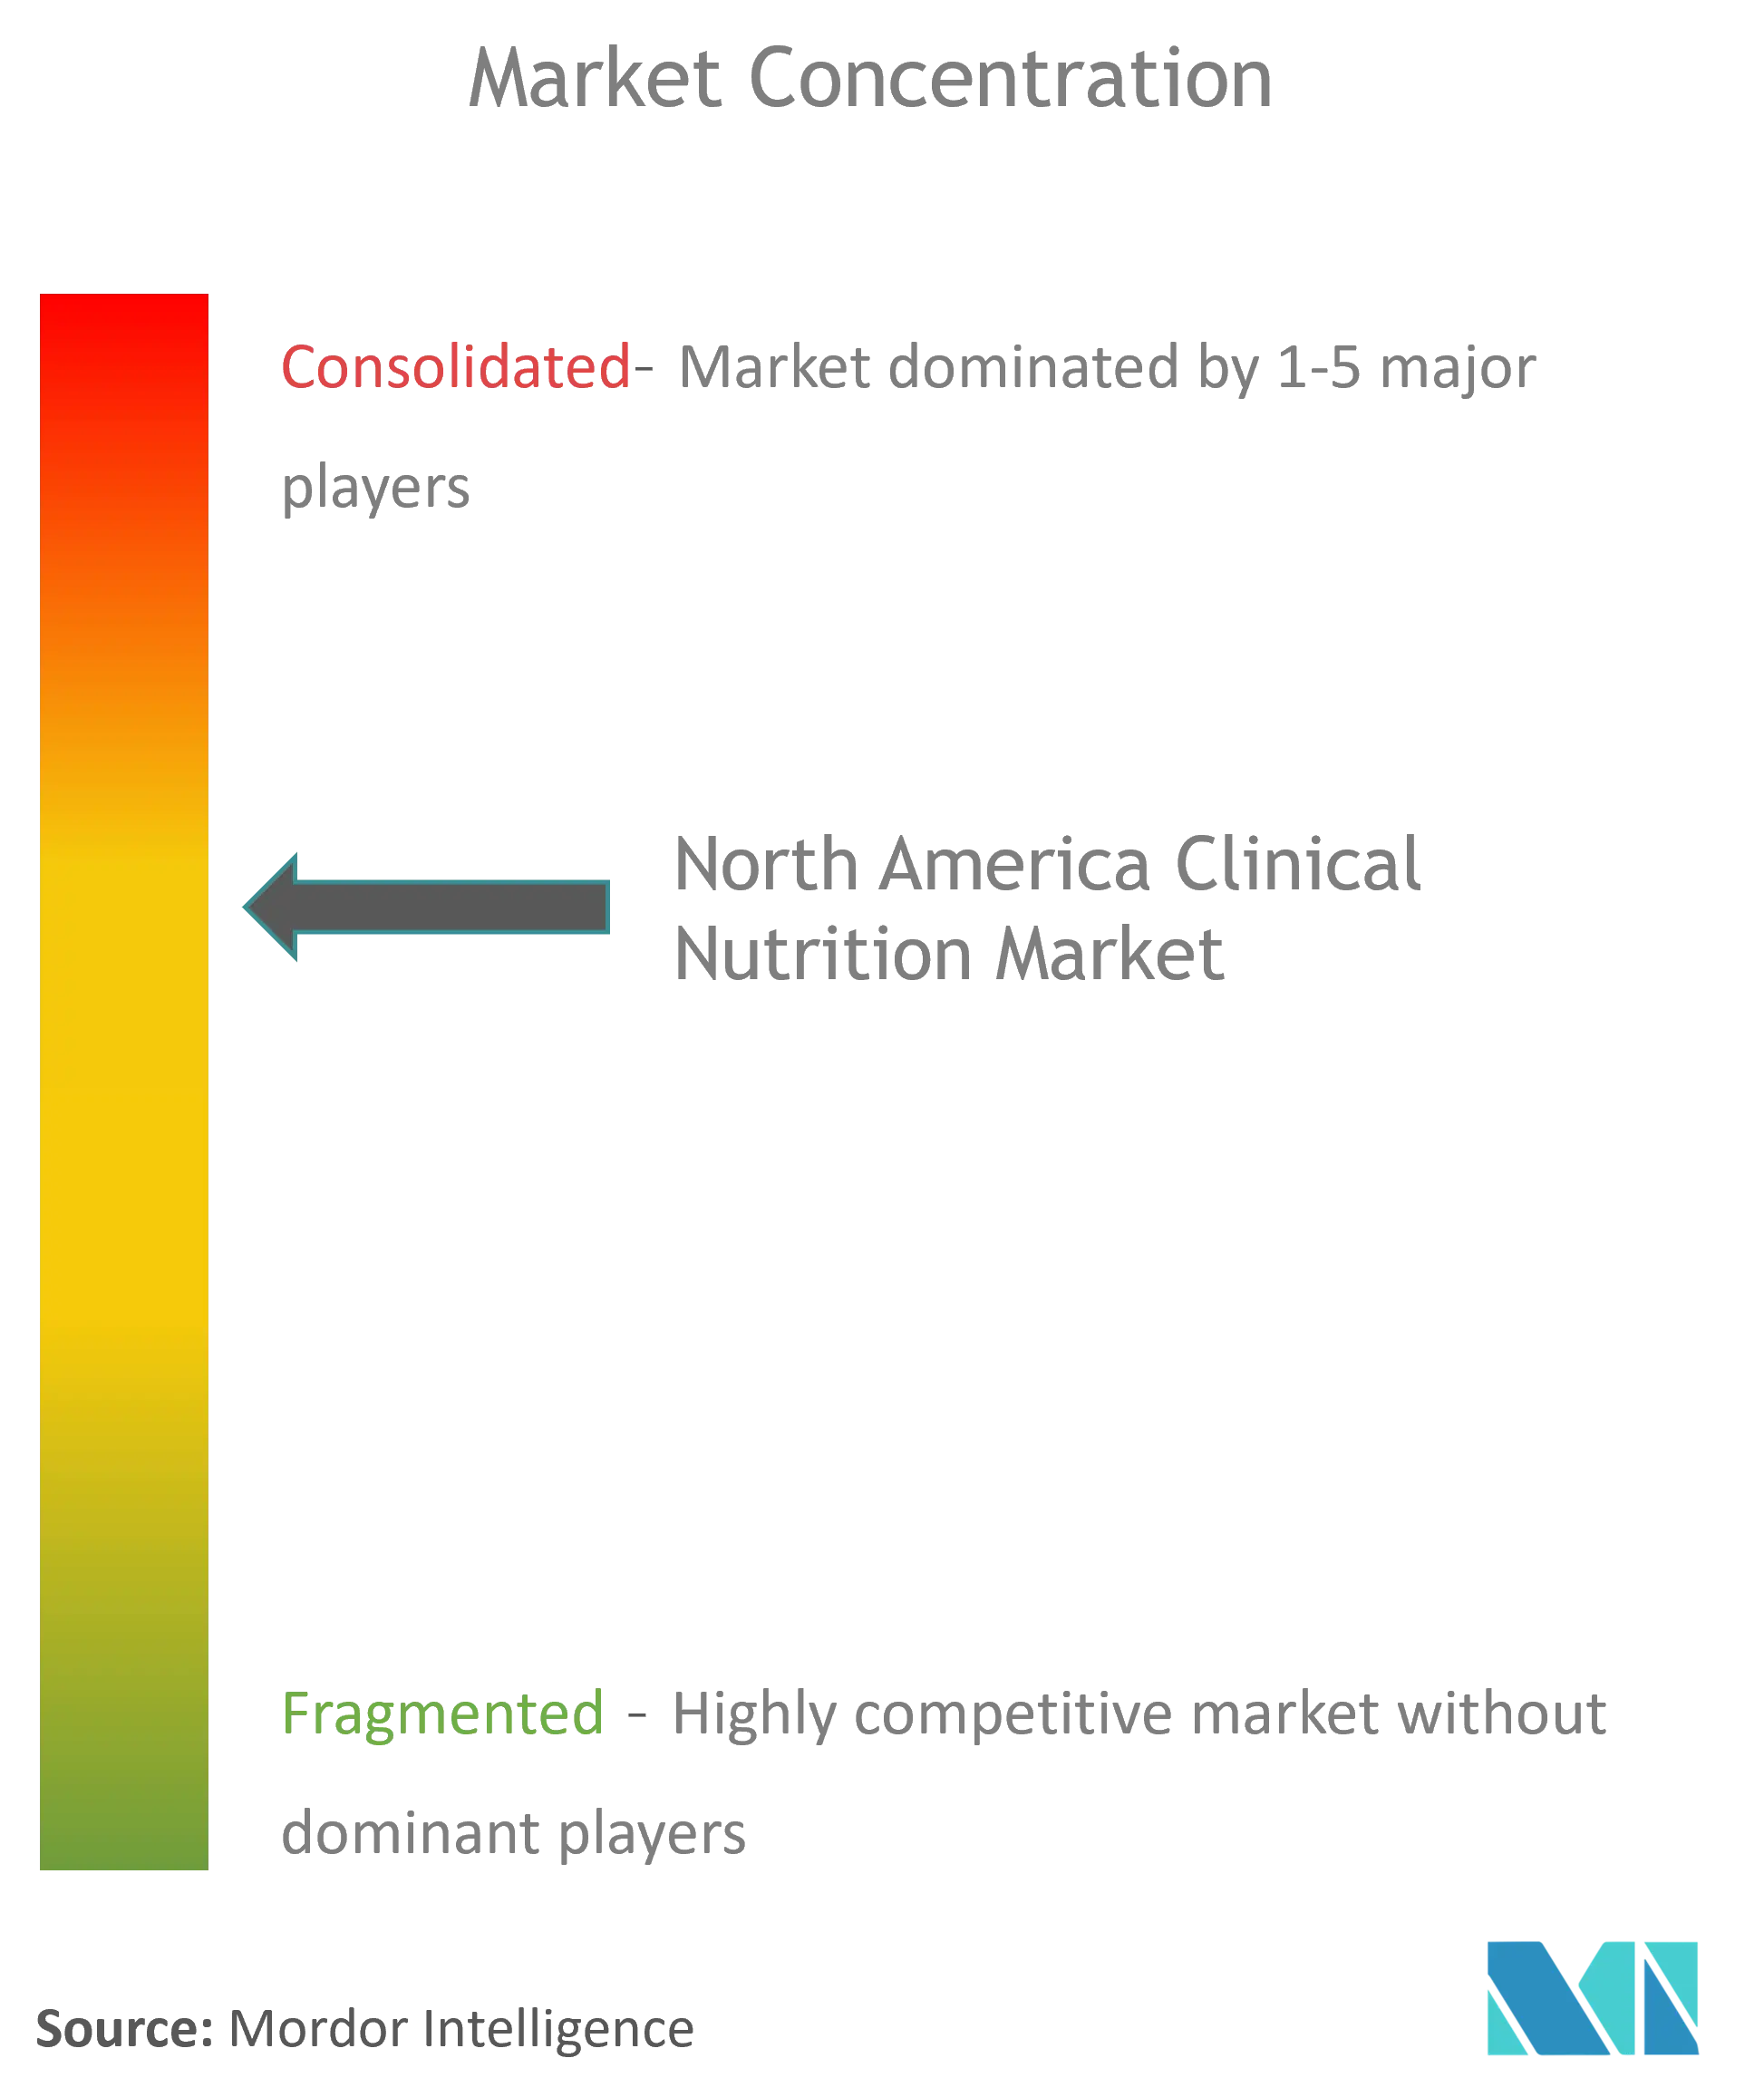 North America Clinical nutrition Market - cl.png